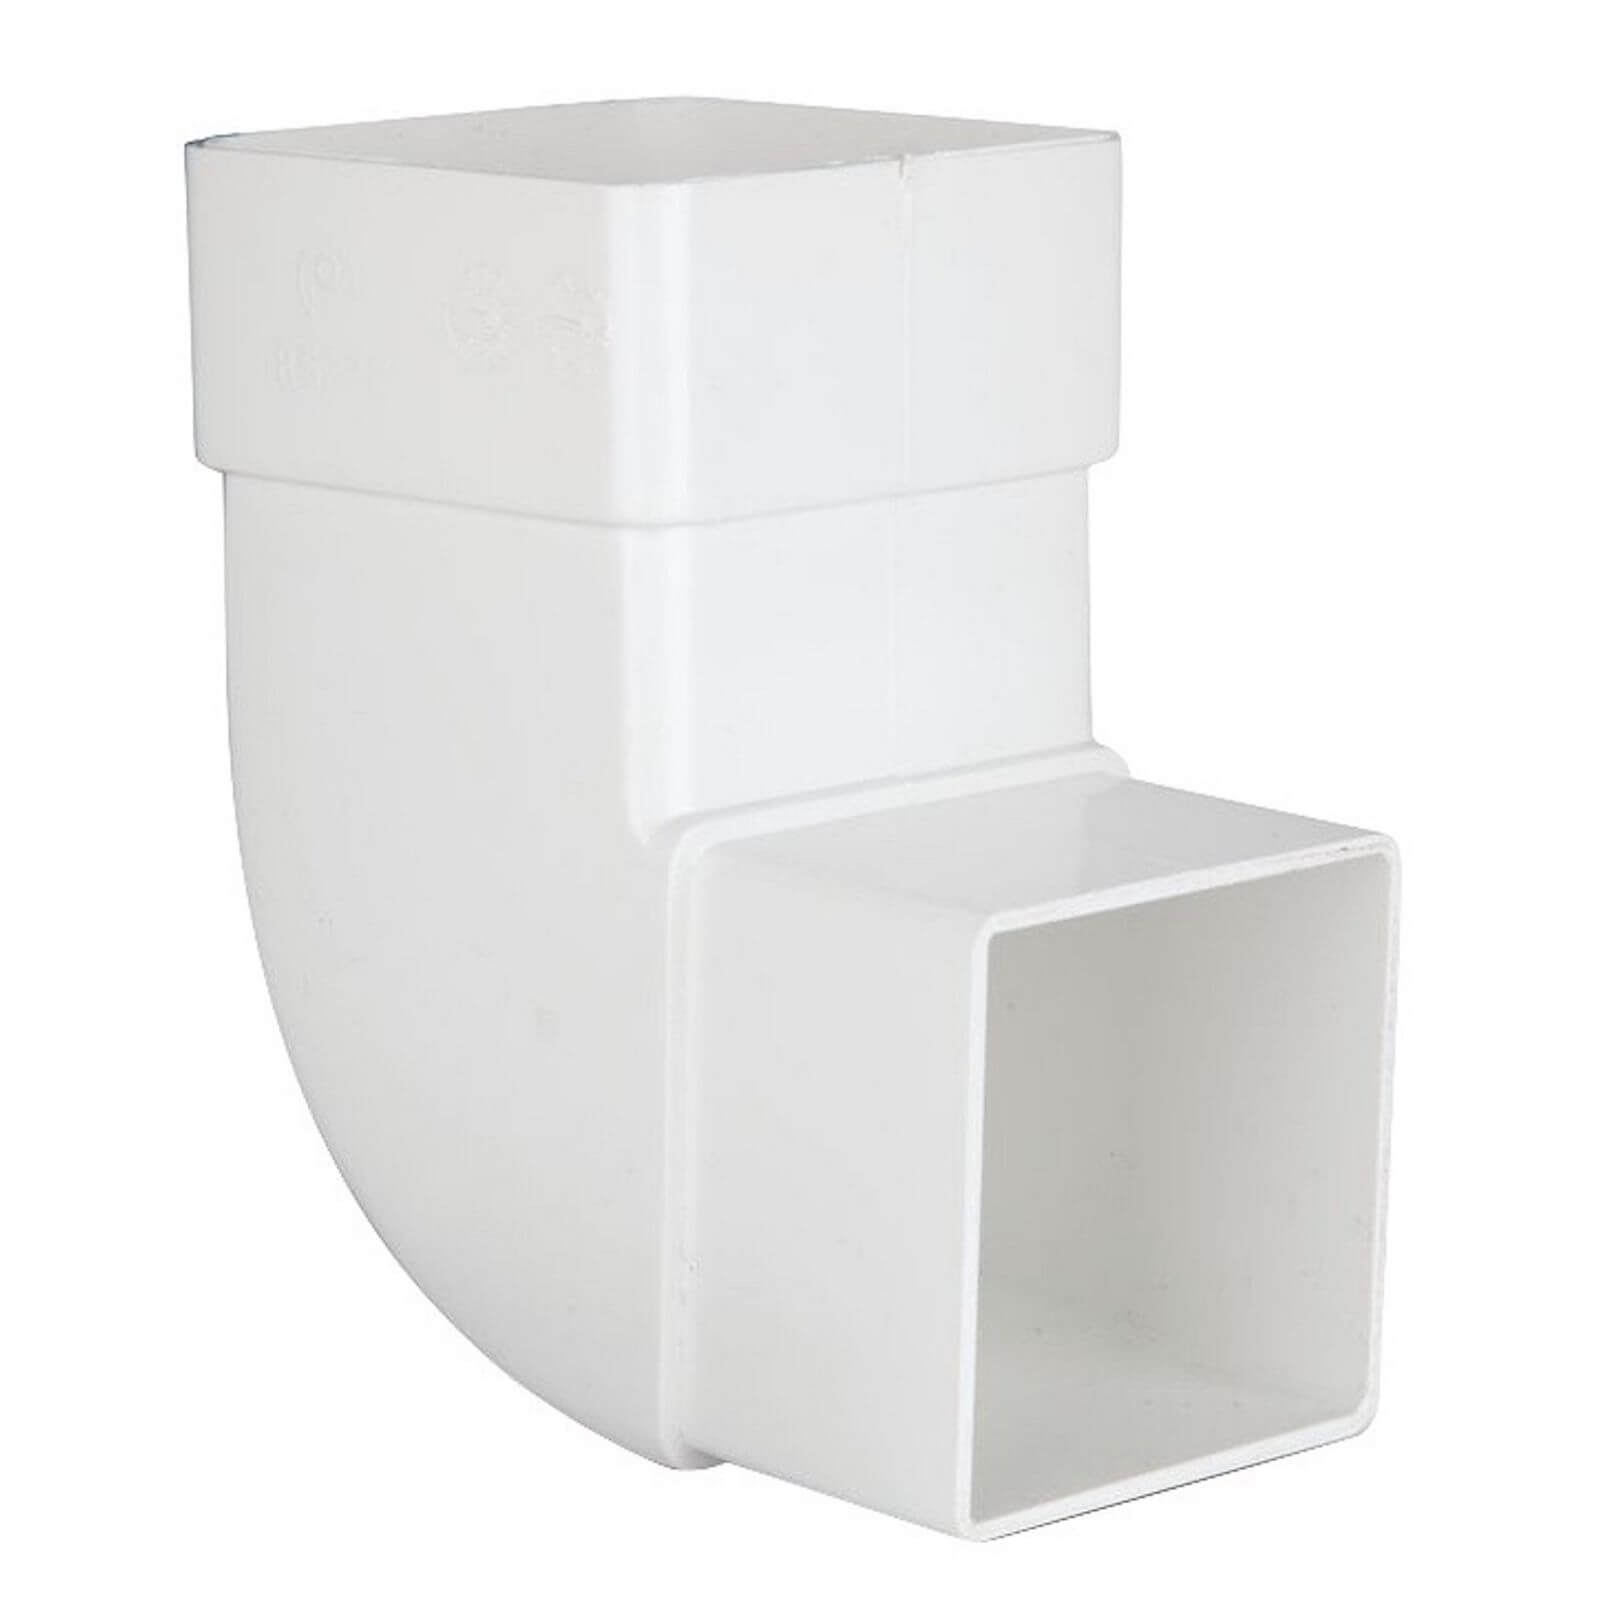 Polypipe Square Offset Bend - 65mm x 92.5 Degree - White